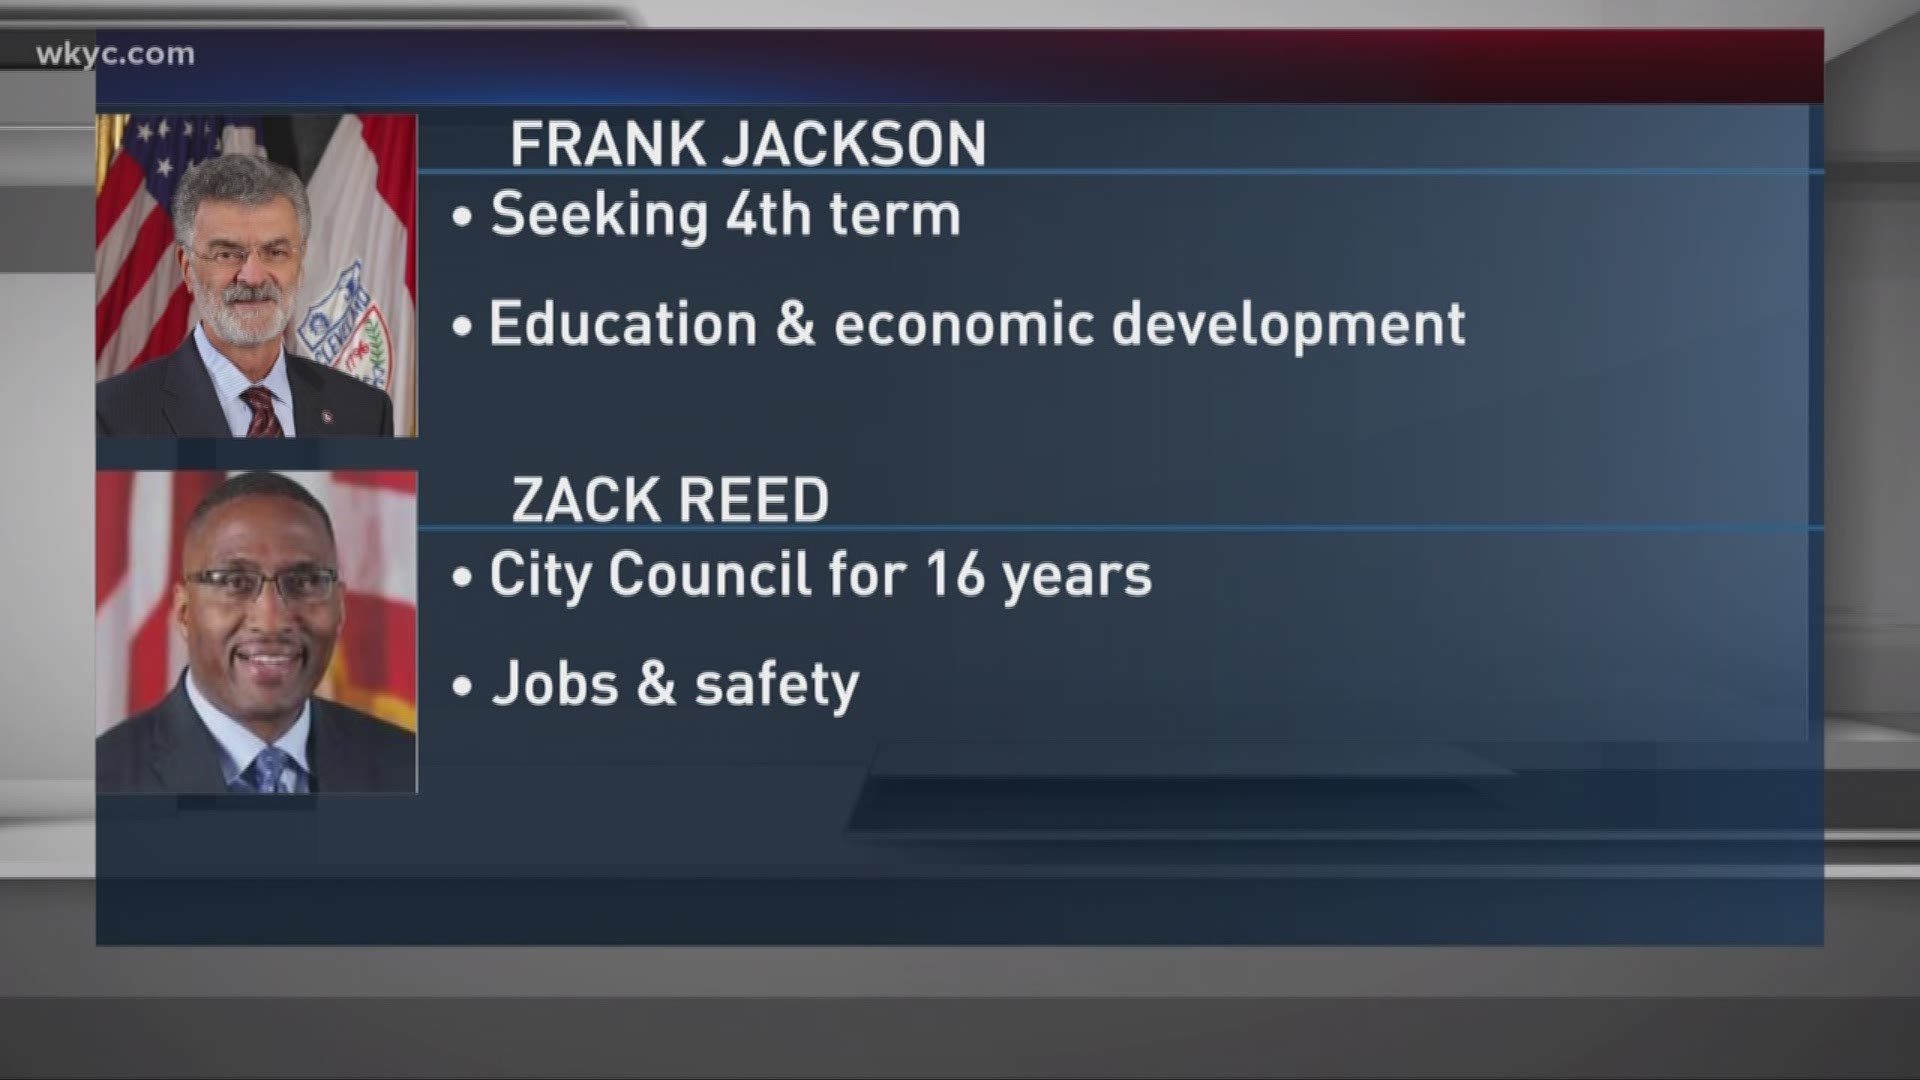 Nov. 7, 2017: Cleveland Mayor Frank Jackson is seeking his fourth term in office against councilman Zack Reed.